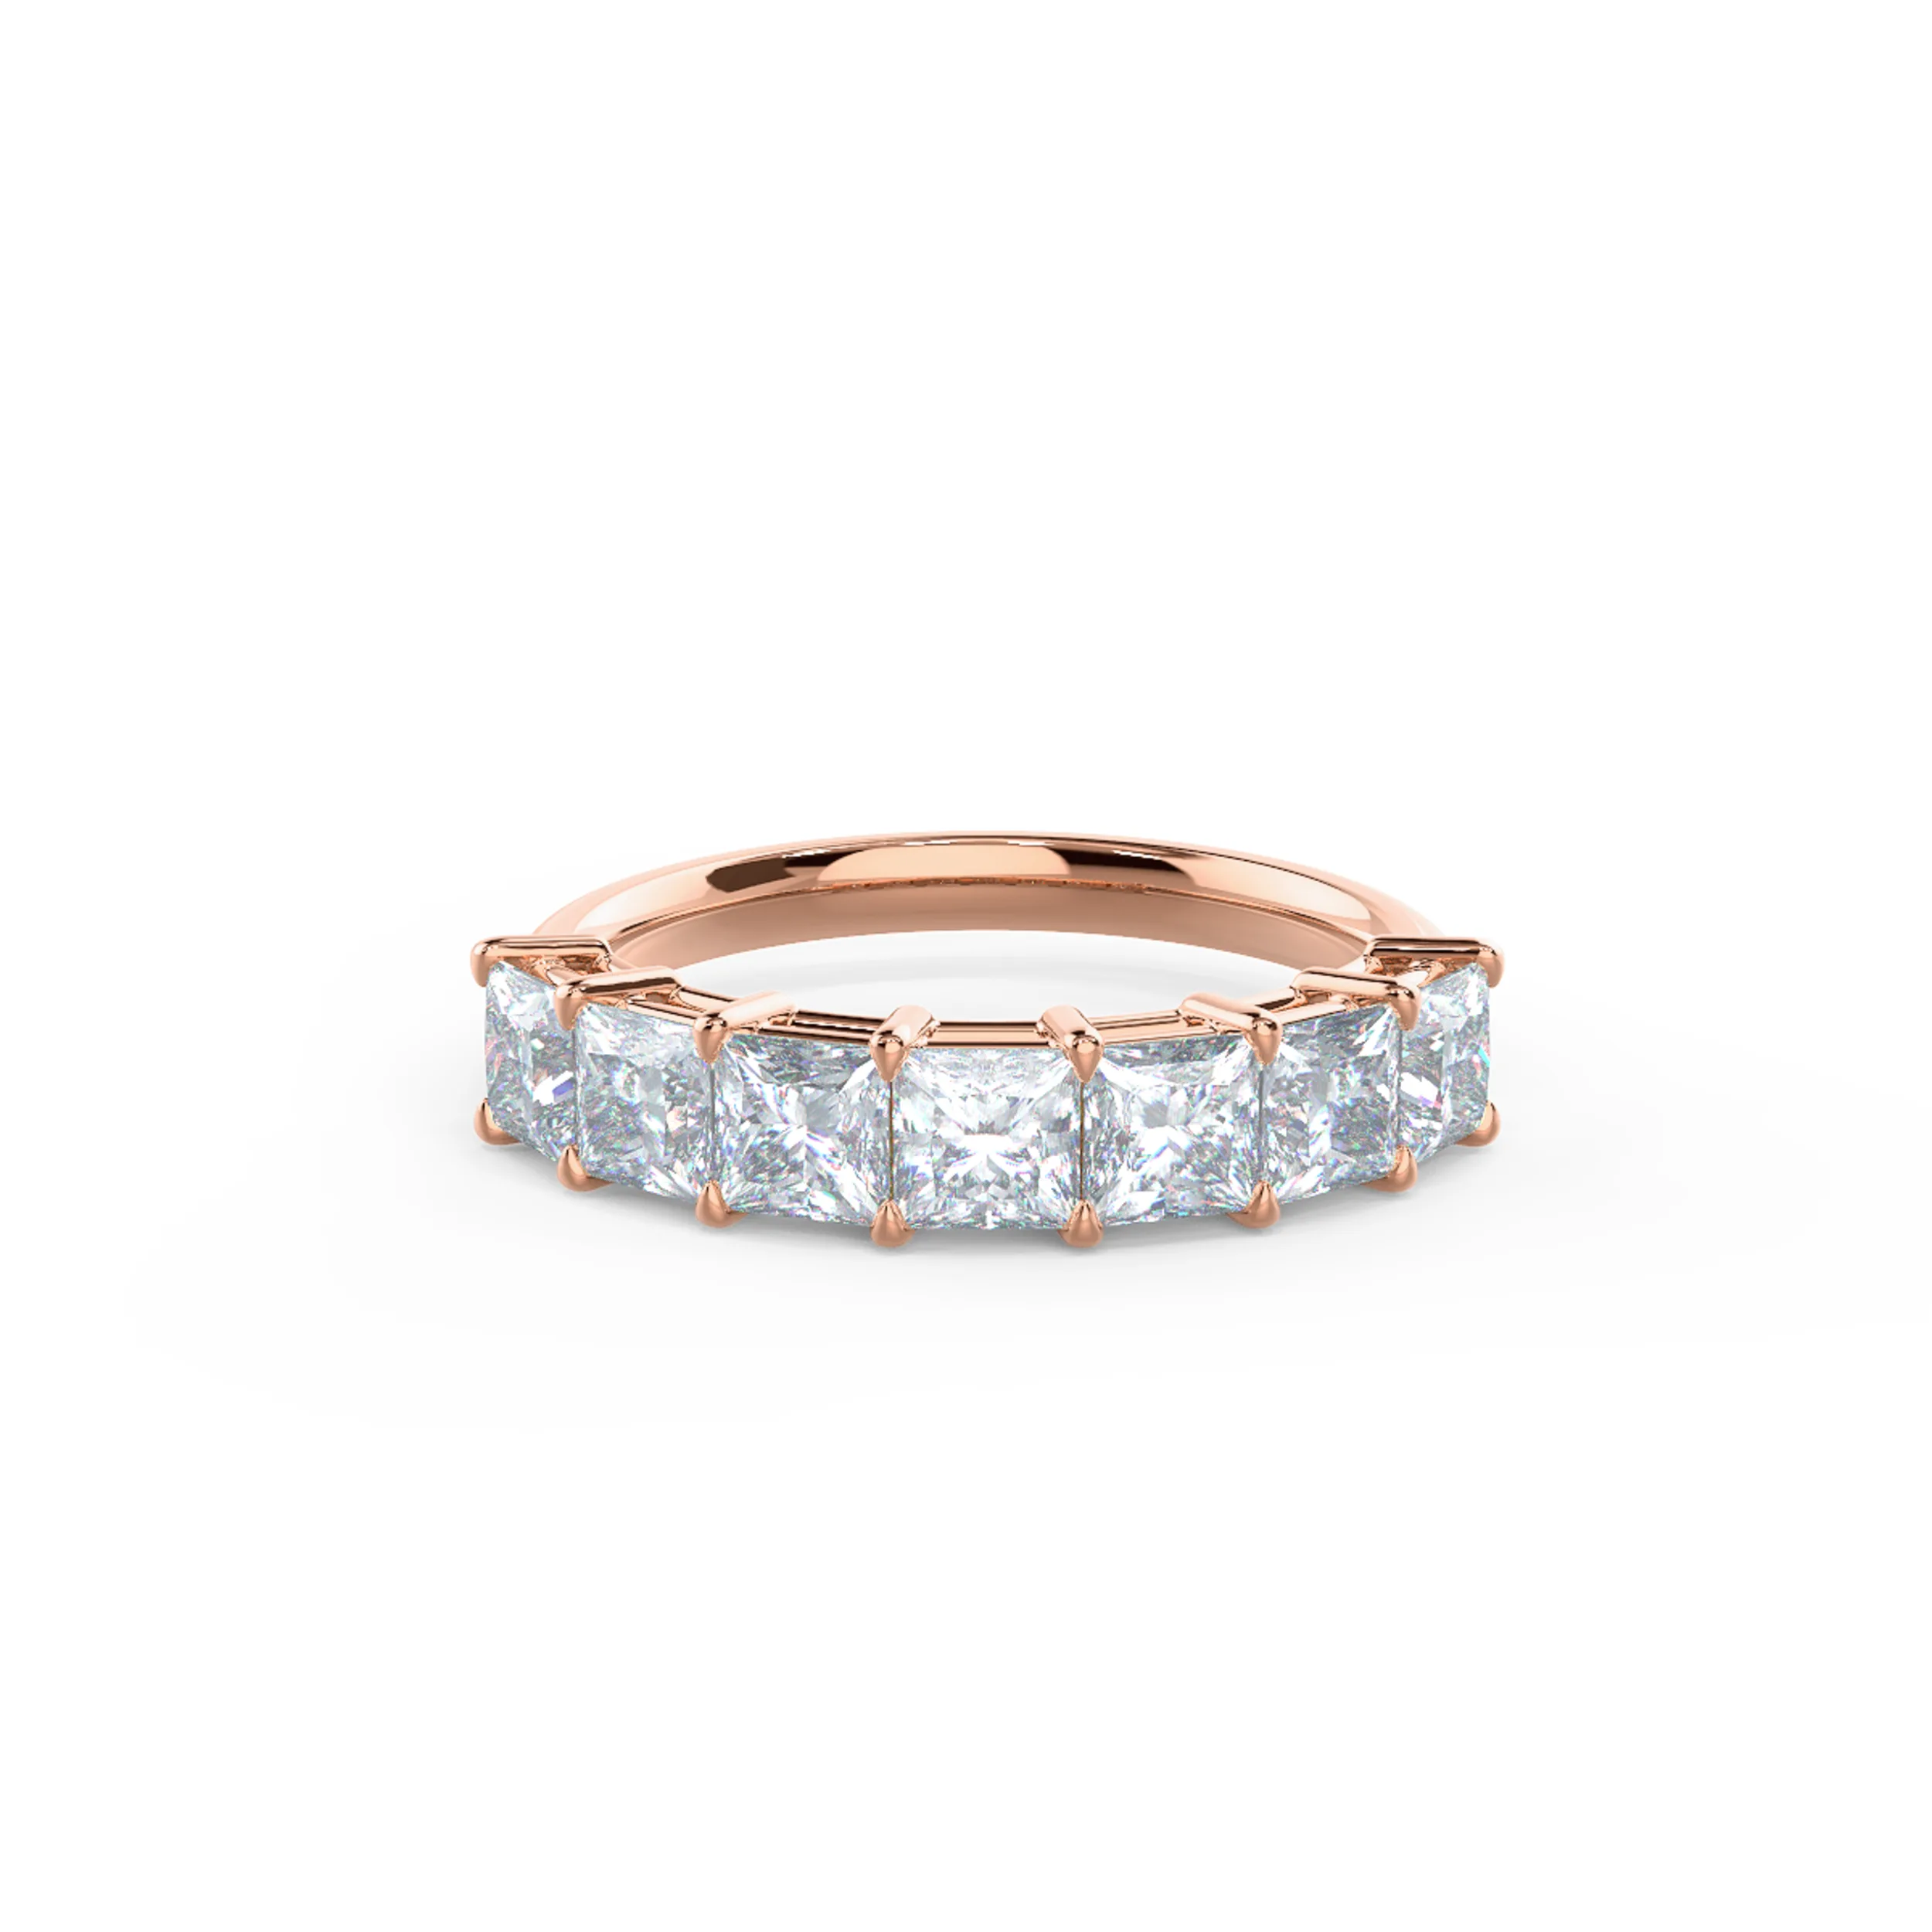 Hand Selected 2.0 ct Lab Diamonds set in 14k Rose Gold Princess Seven Stone (Main View)